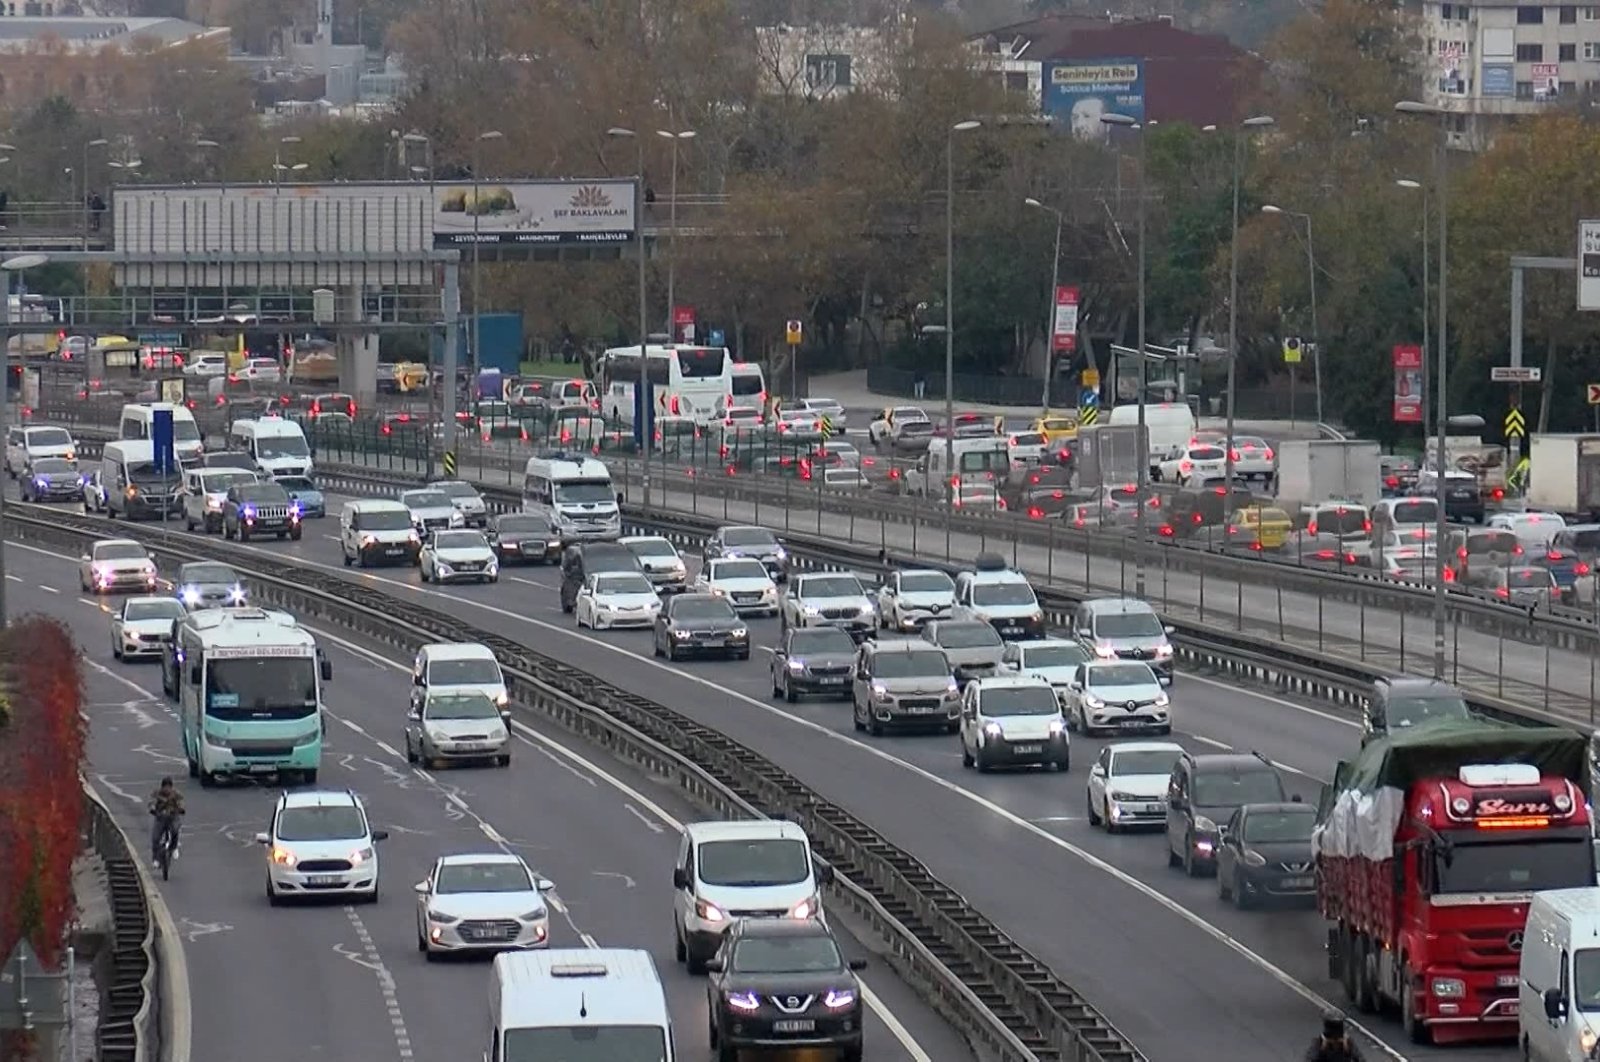 Vehicles are seen on a highway in Istanbul, Türkiye, in this undated file photo. (DHA Photo)